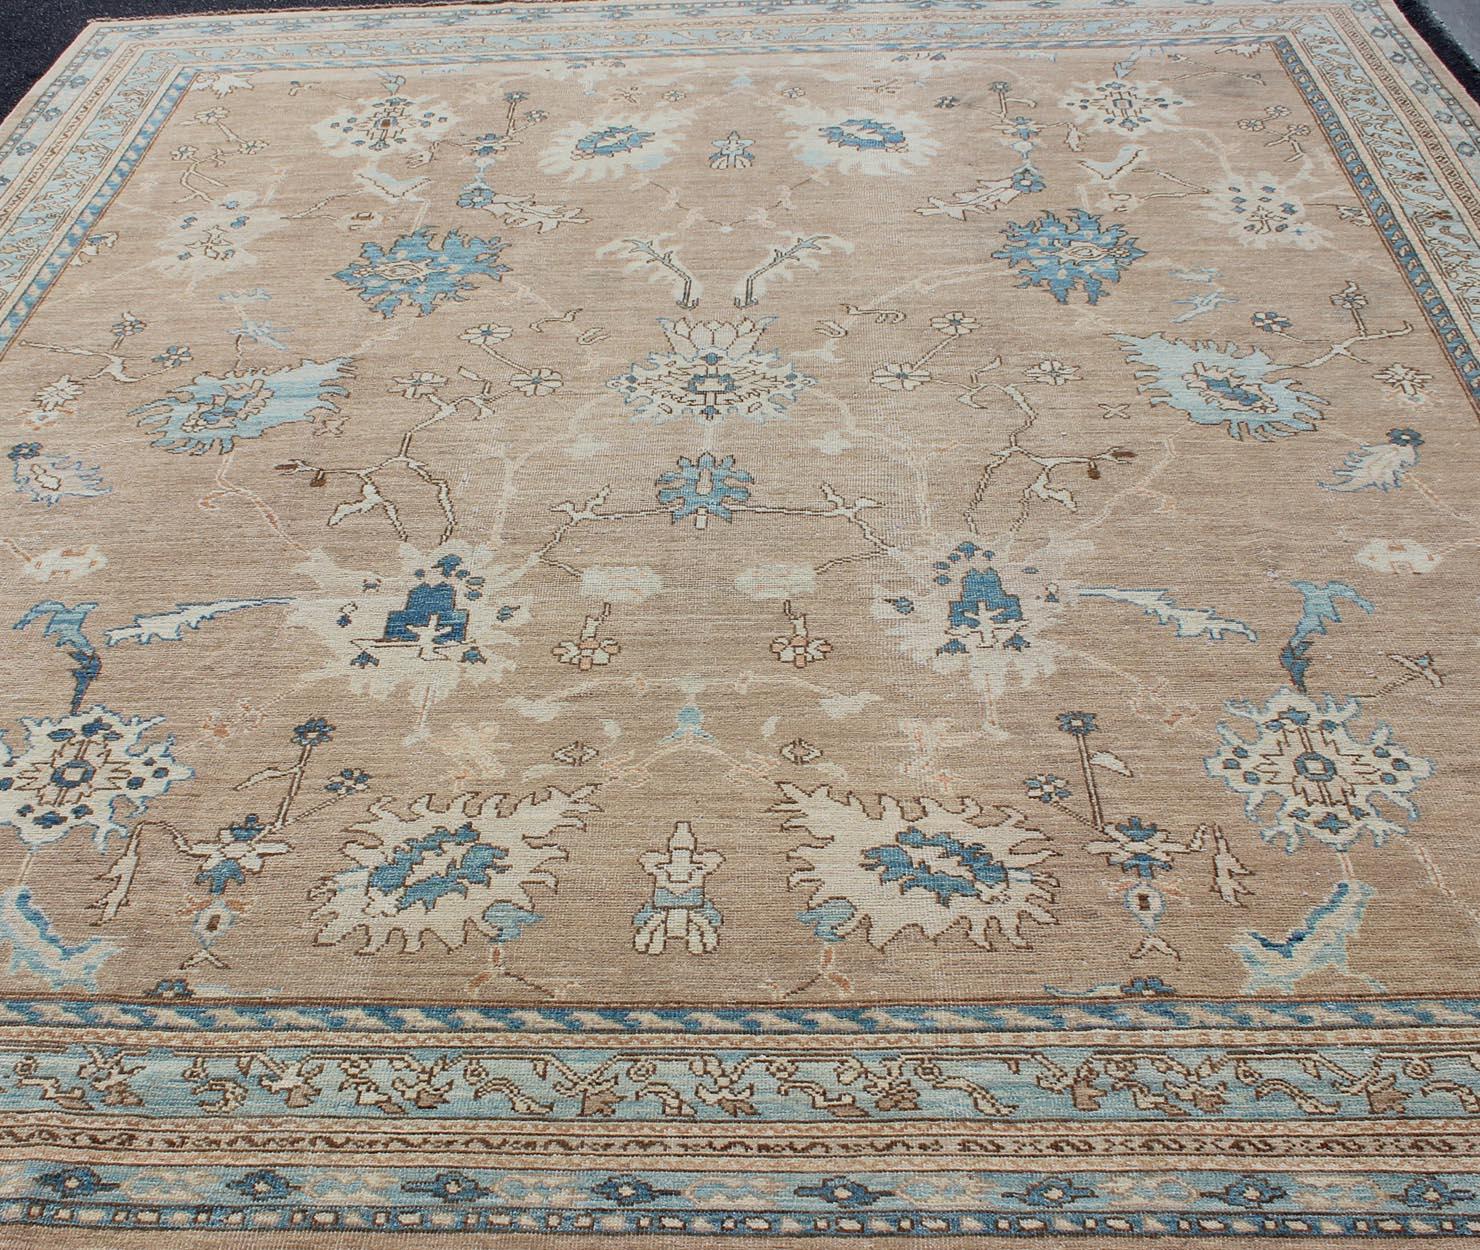 Late 20th Century Squared Shape Vintage Oushak Rug With Tan, Blue and Neutral Colors